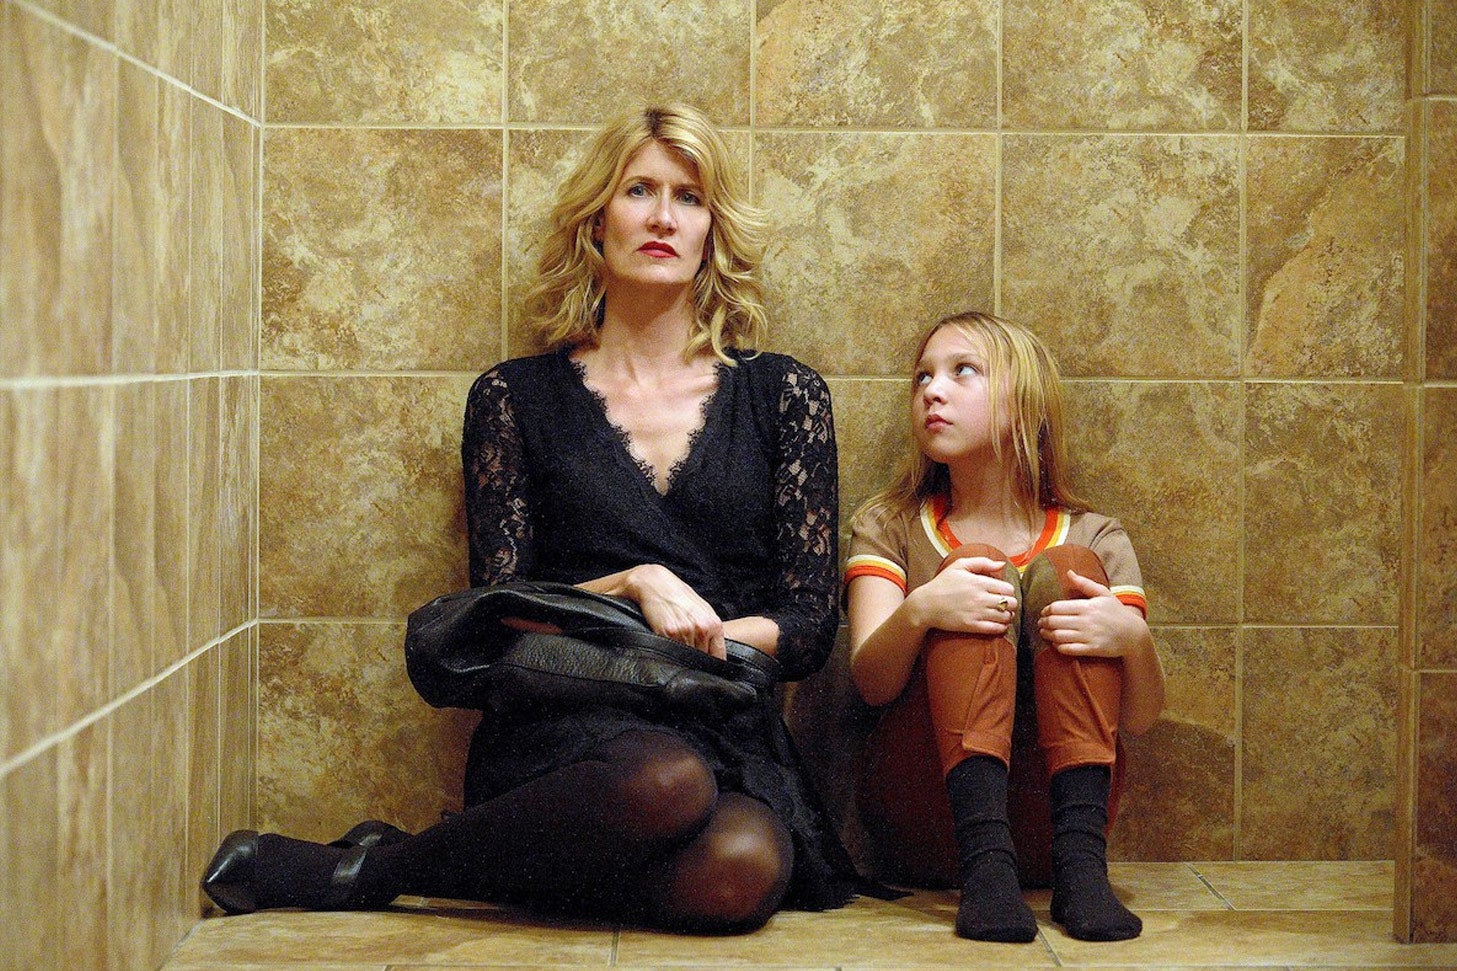 Laura Dern and Isabelle Nélisse sit next to each other on a tile floor in this promotional image for The Tale.